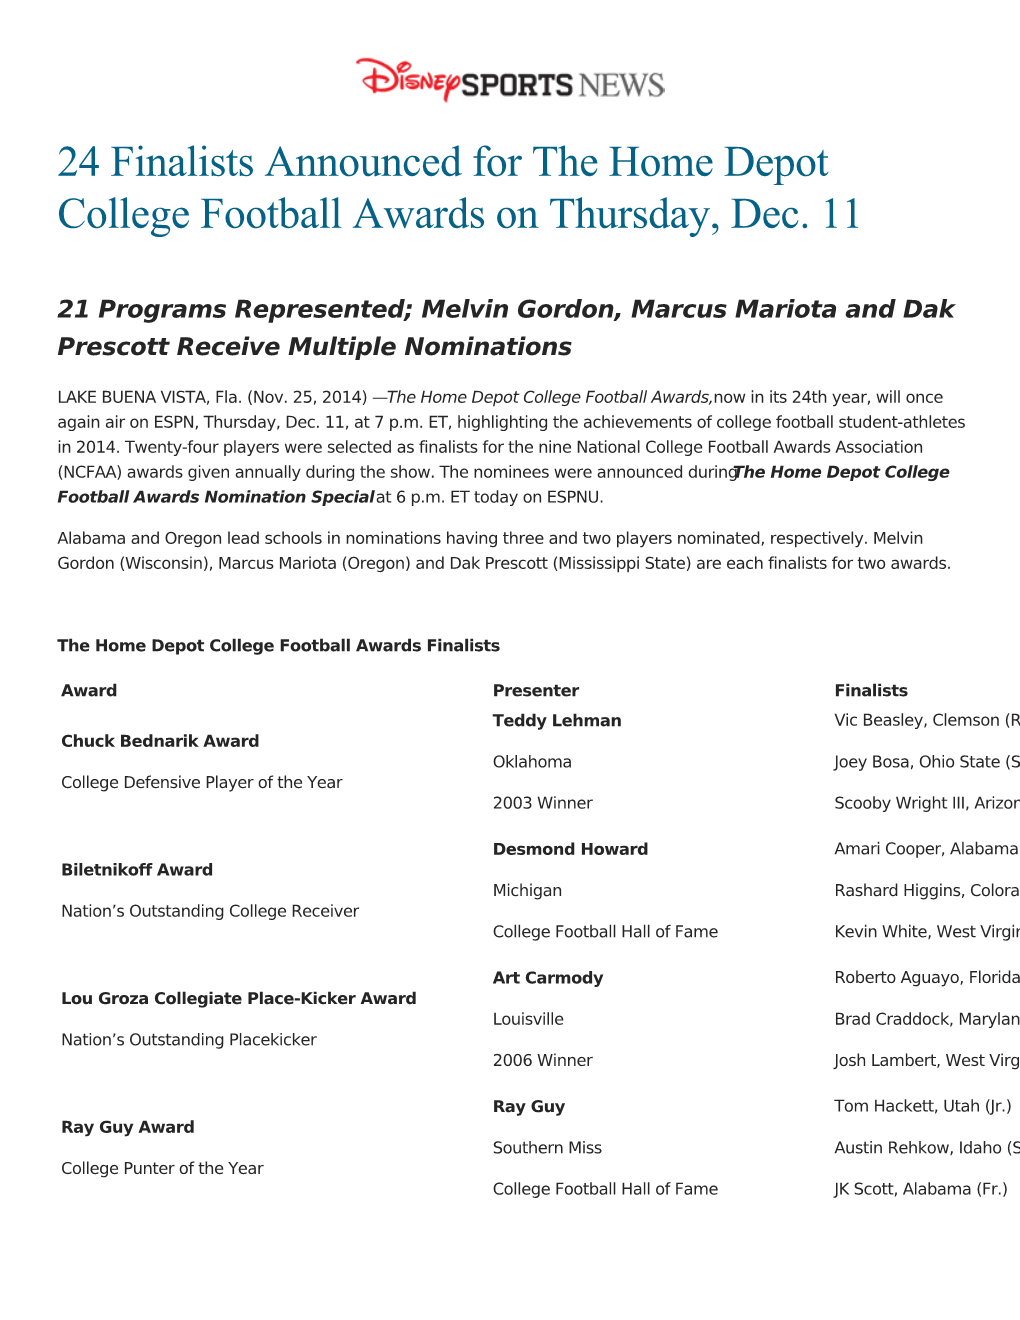 24 Finalists Announced for the Home Depot College Football Awards on Thursday, Dec